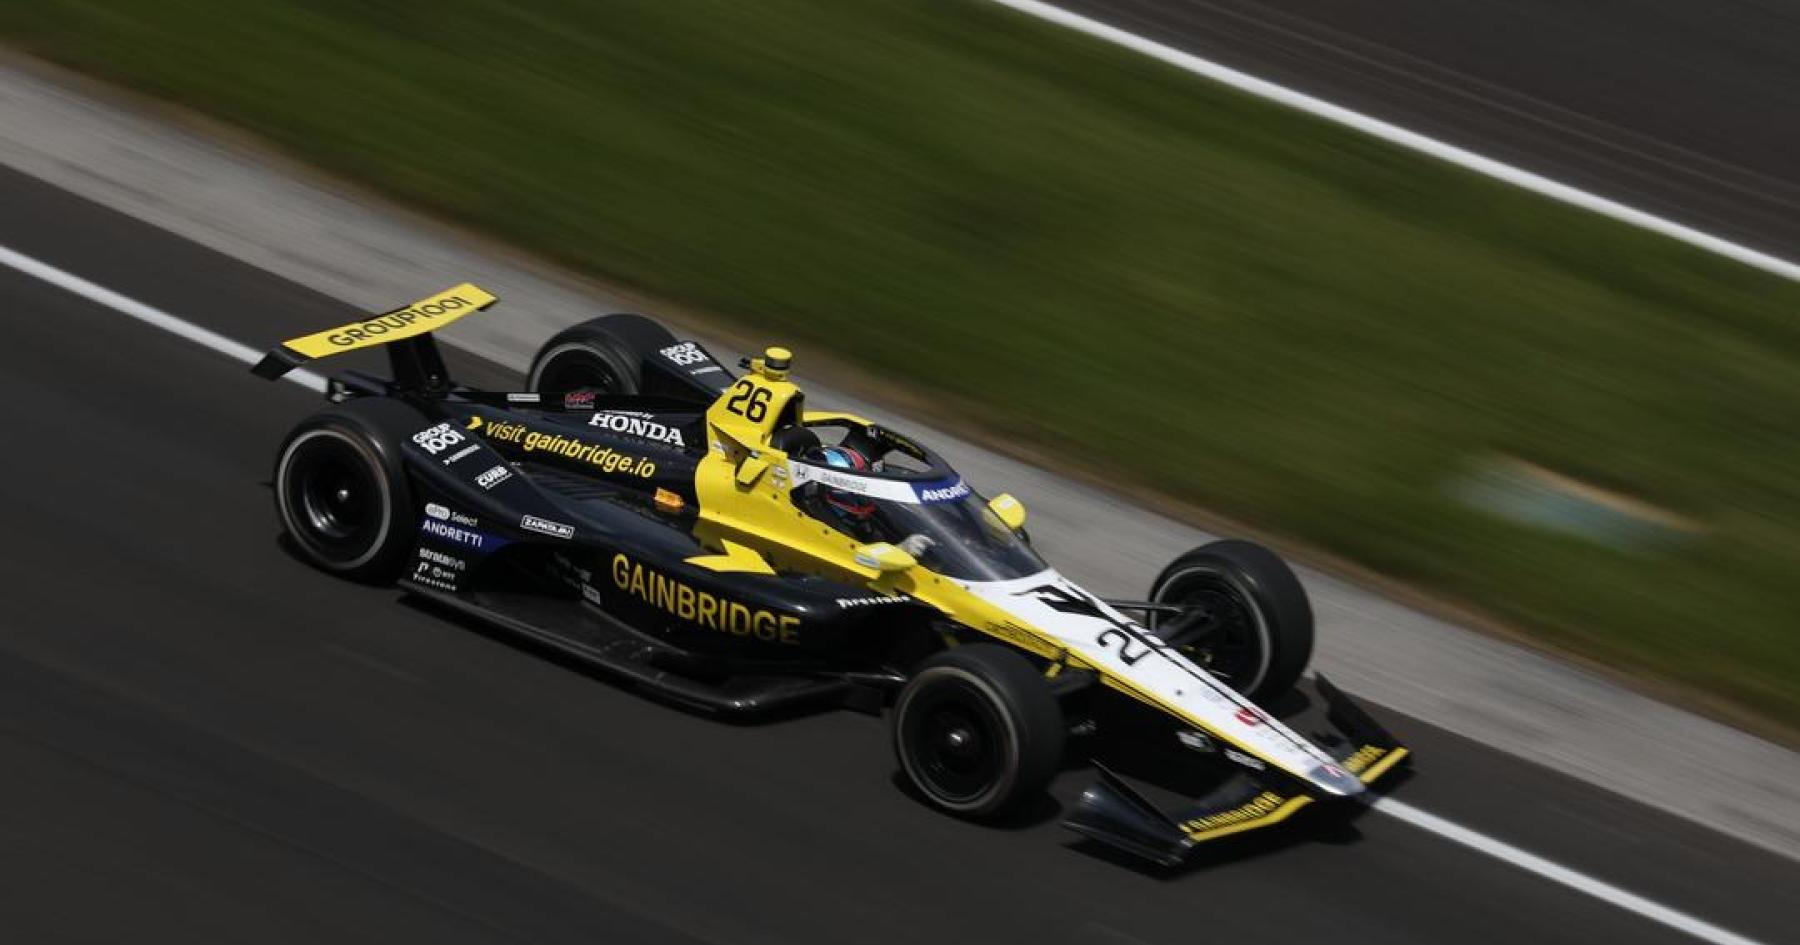 Crucial Competitor's Dream Dashed in Heartbreaking Indy 500 Turn 1 Mishap